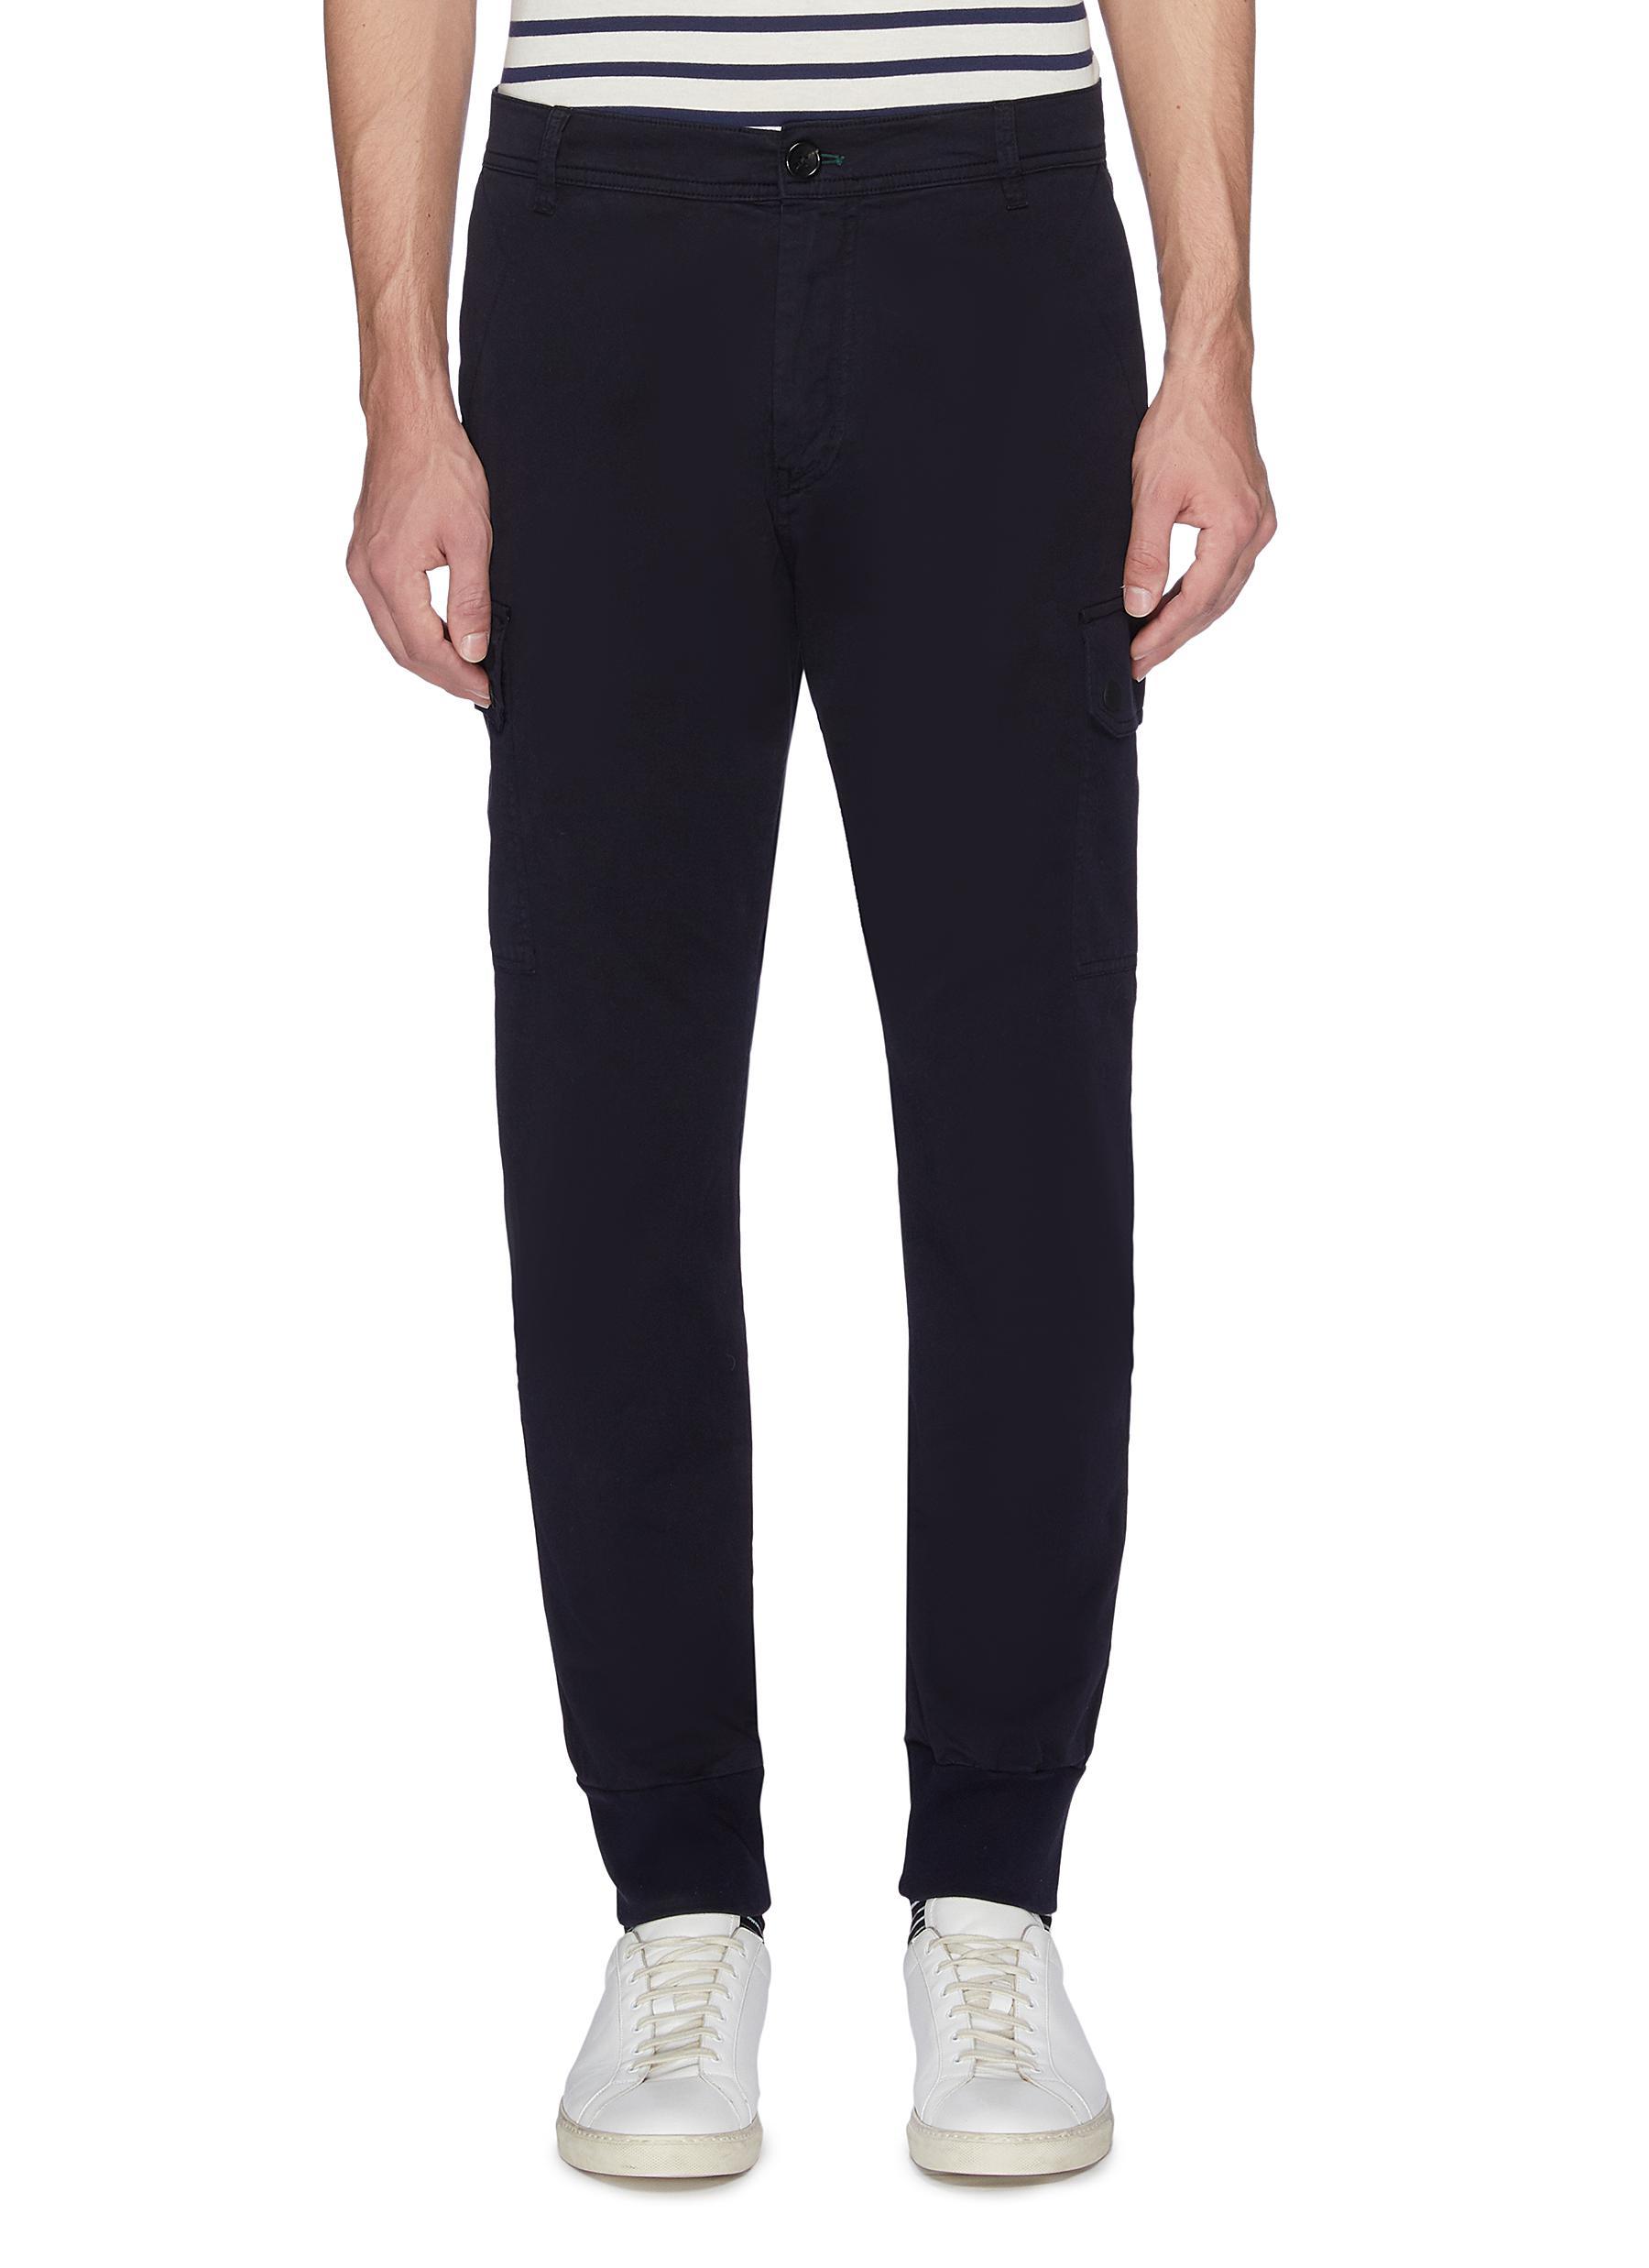 PS by Paul Smith 'military' Cargo Pants in Blue for Men - Lyst